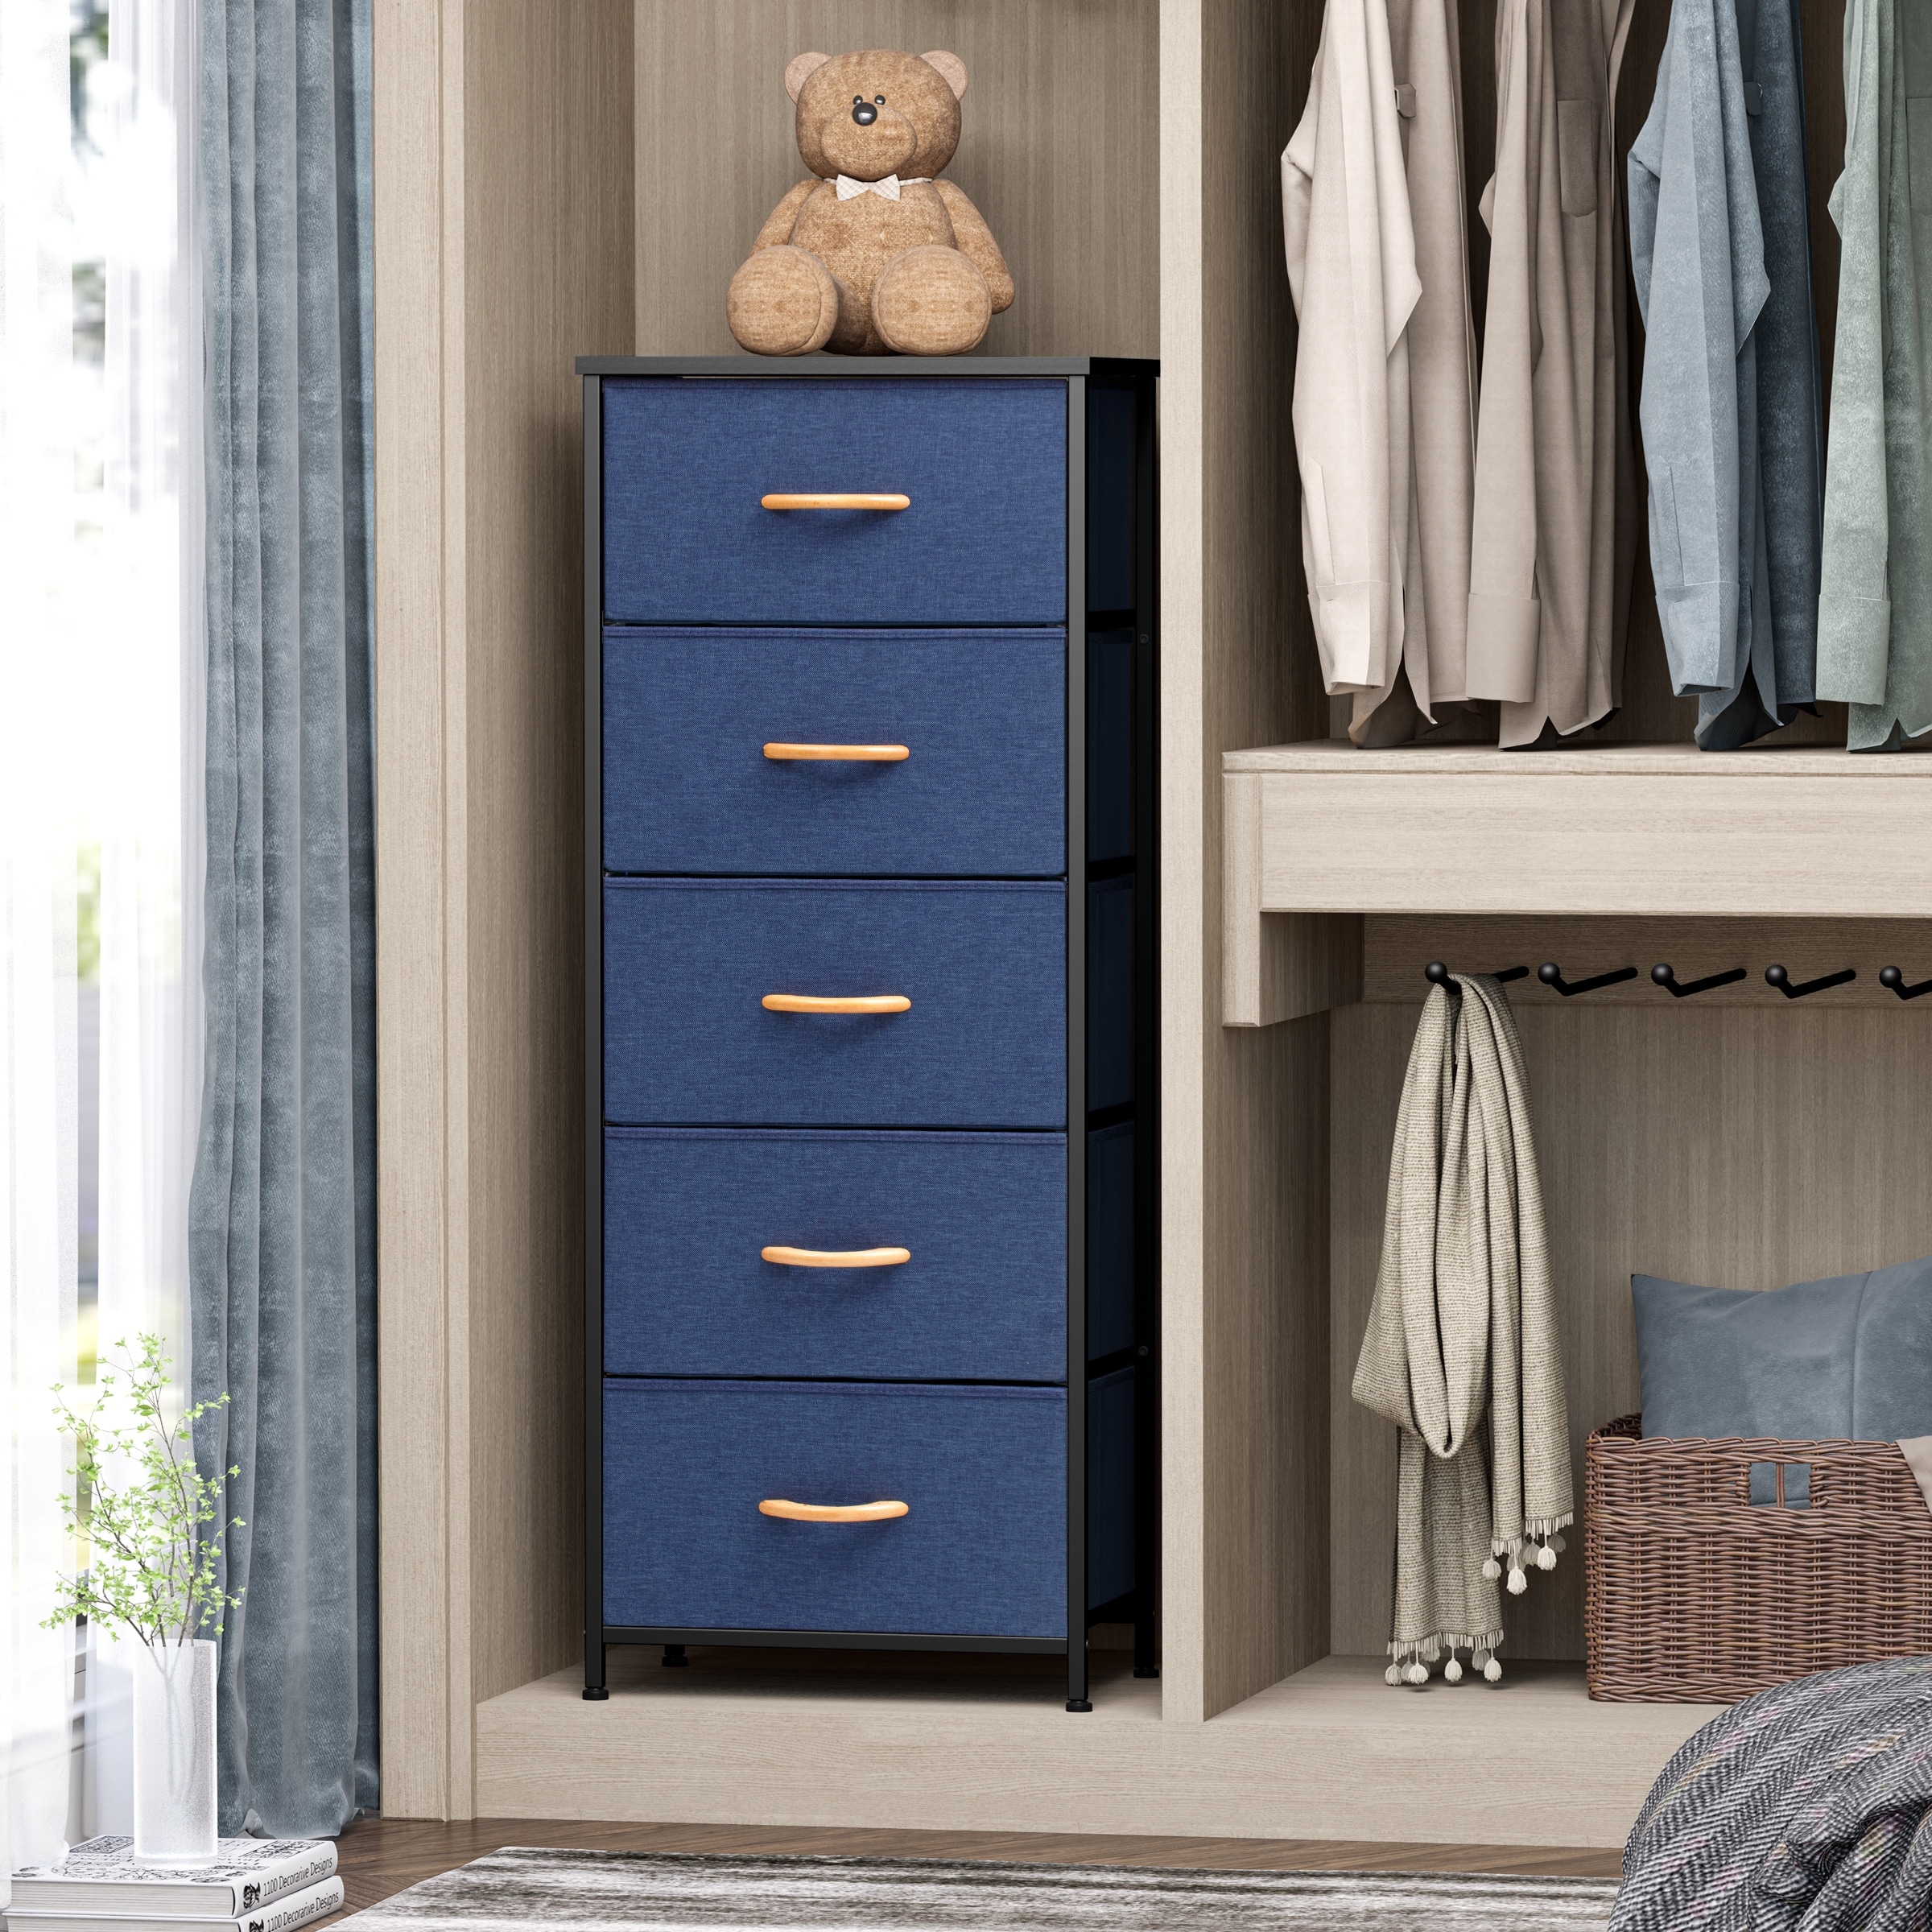 https://ak1.ostkcdn.com/images/products/is/images/direct/7a86e45a8d614554b6436df9bae209375f454d33/Home-Bedroom-Furniture-5-drawer-Chest-Vertical-Storage-Tower---Fabric-Dresser.jpg